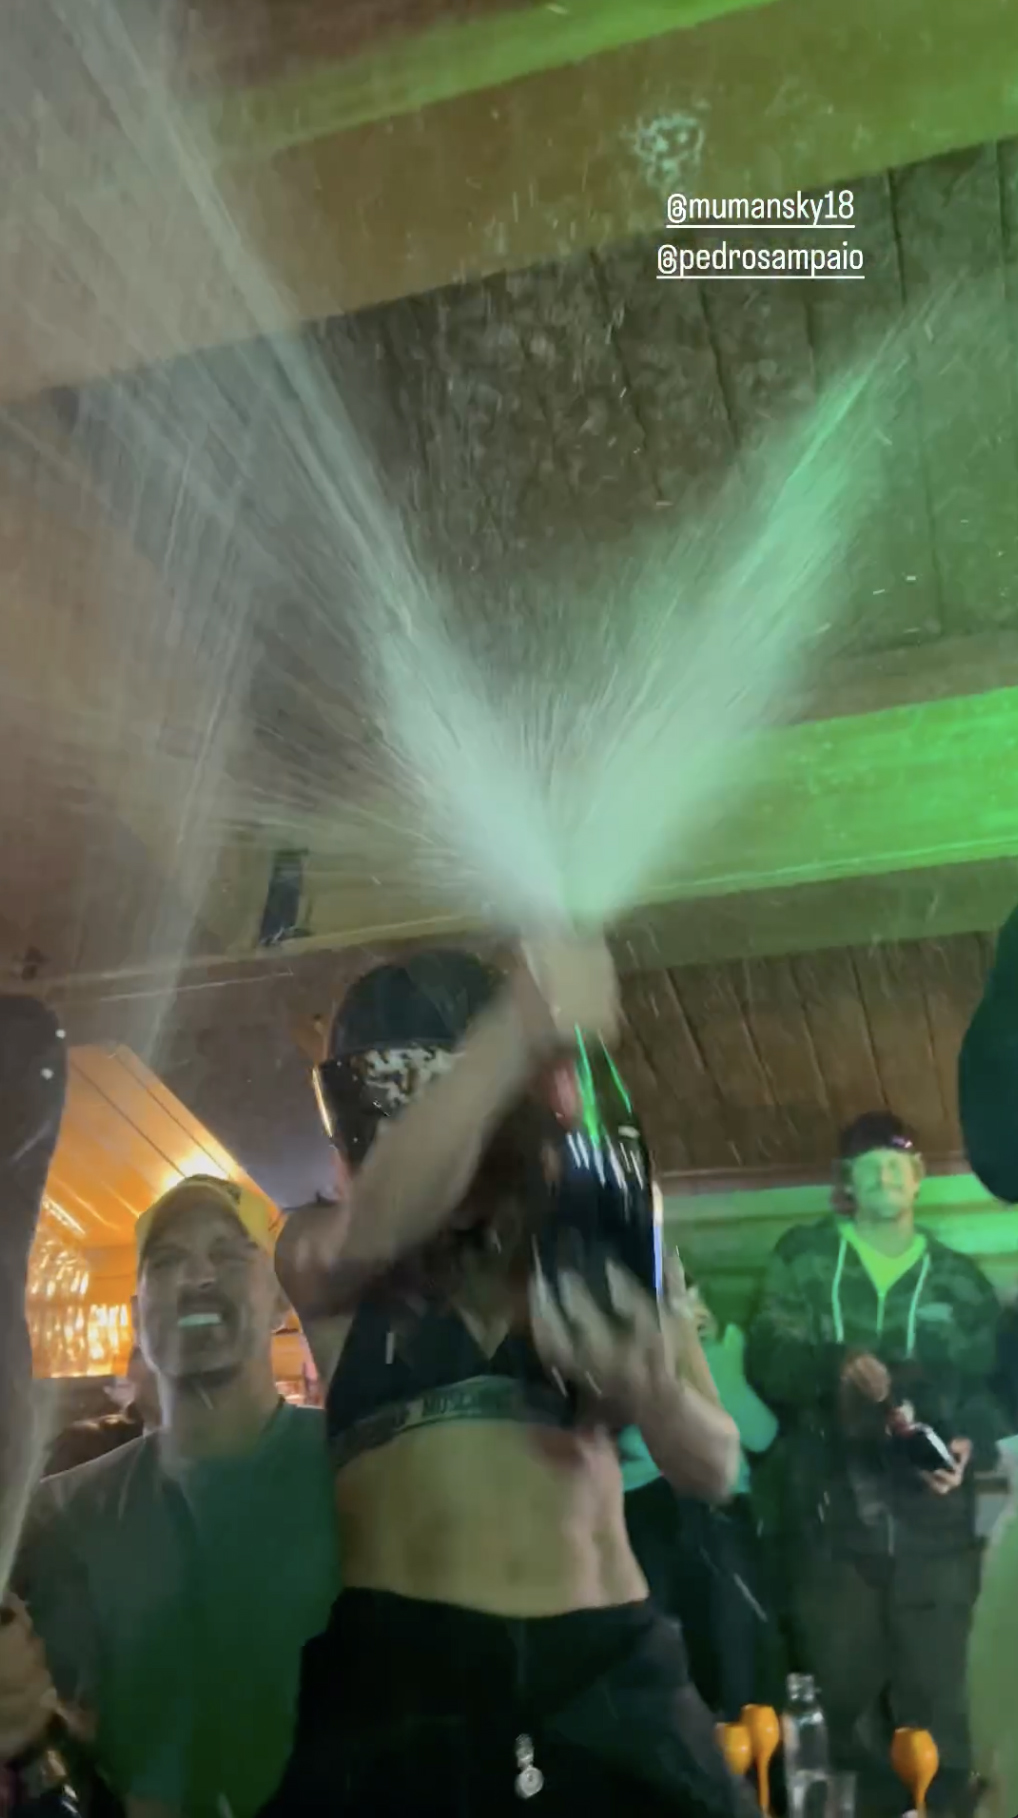 Anitta and Mauricio were spraying bottles of champagne at the party